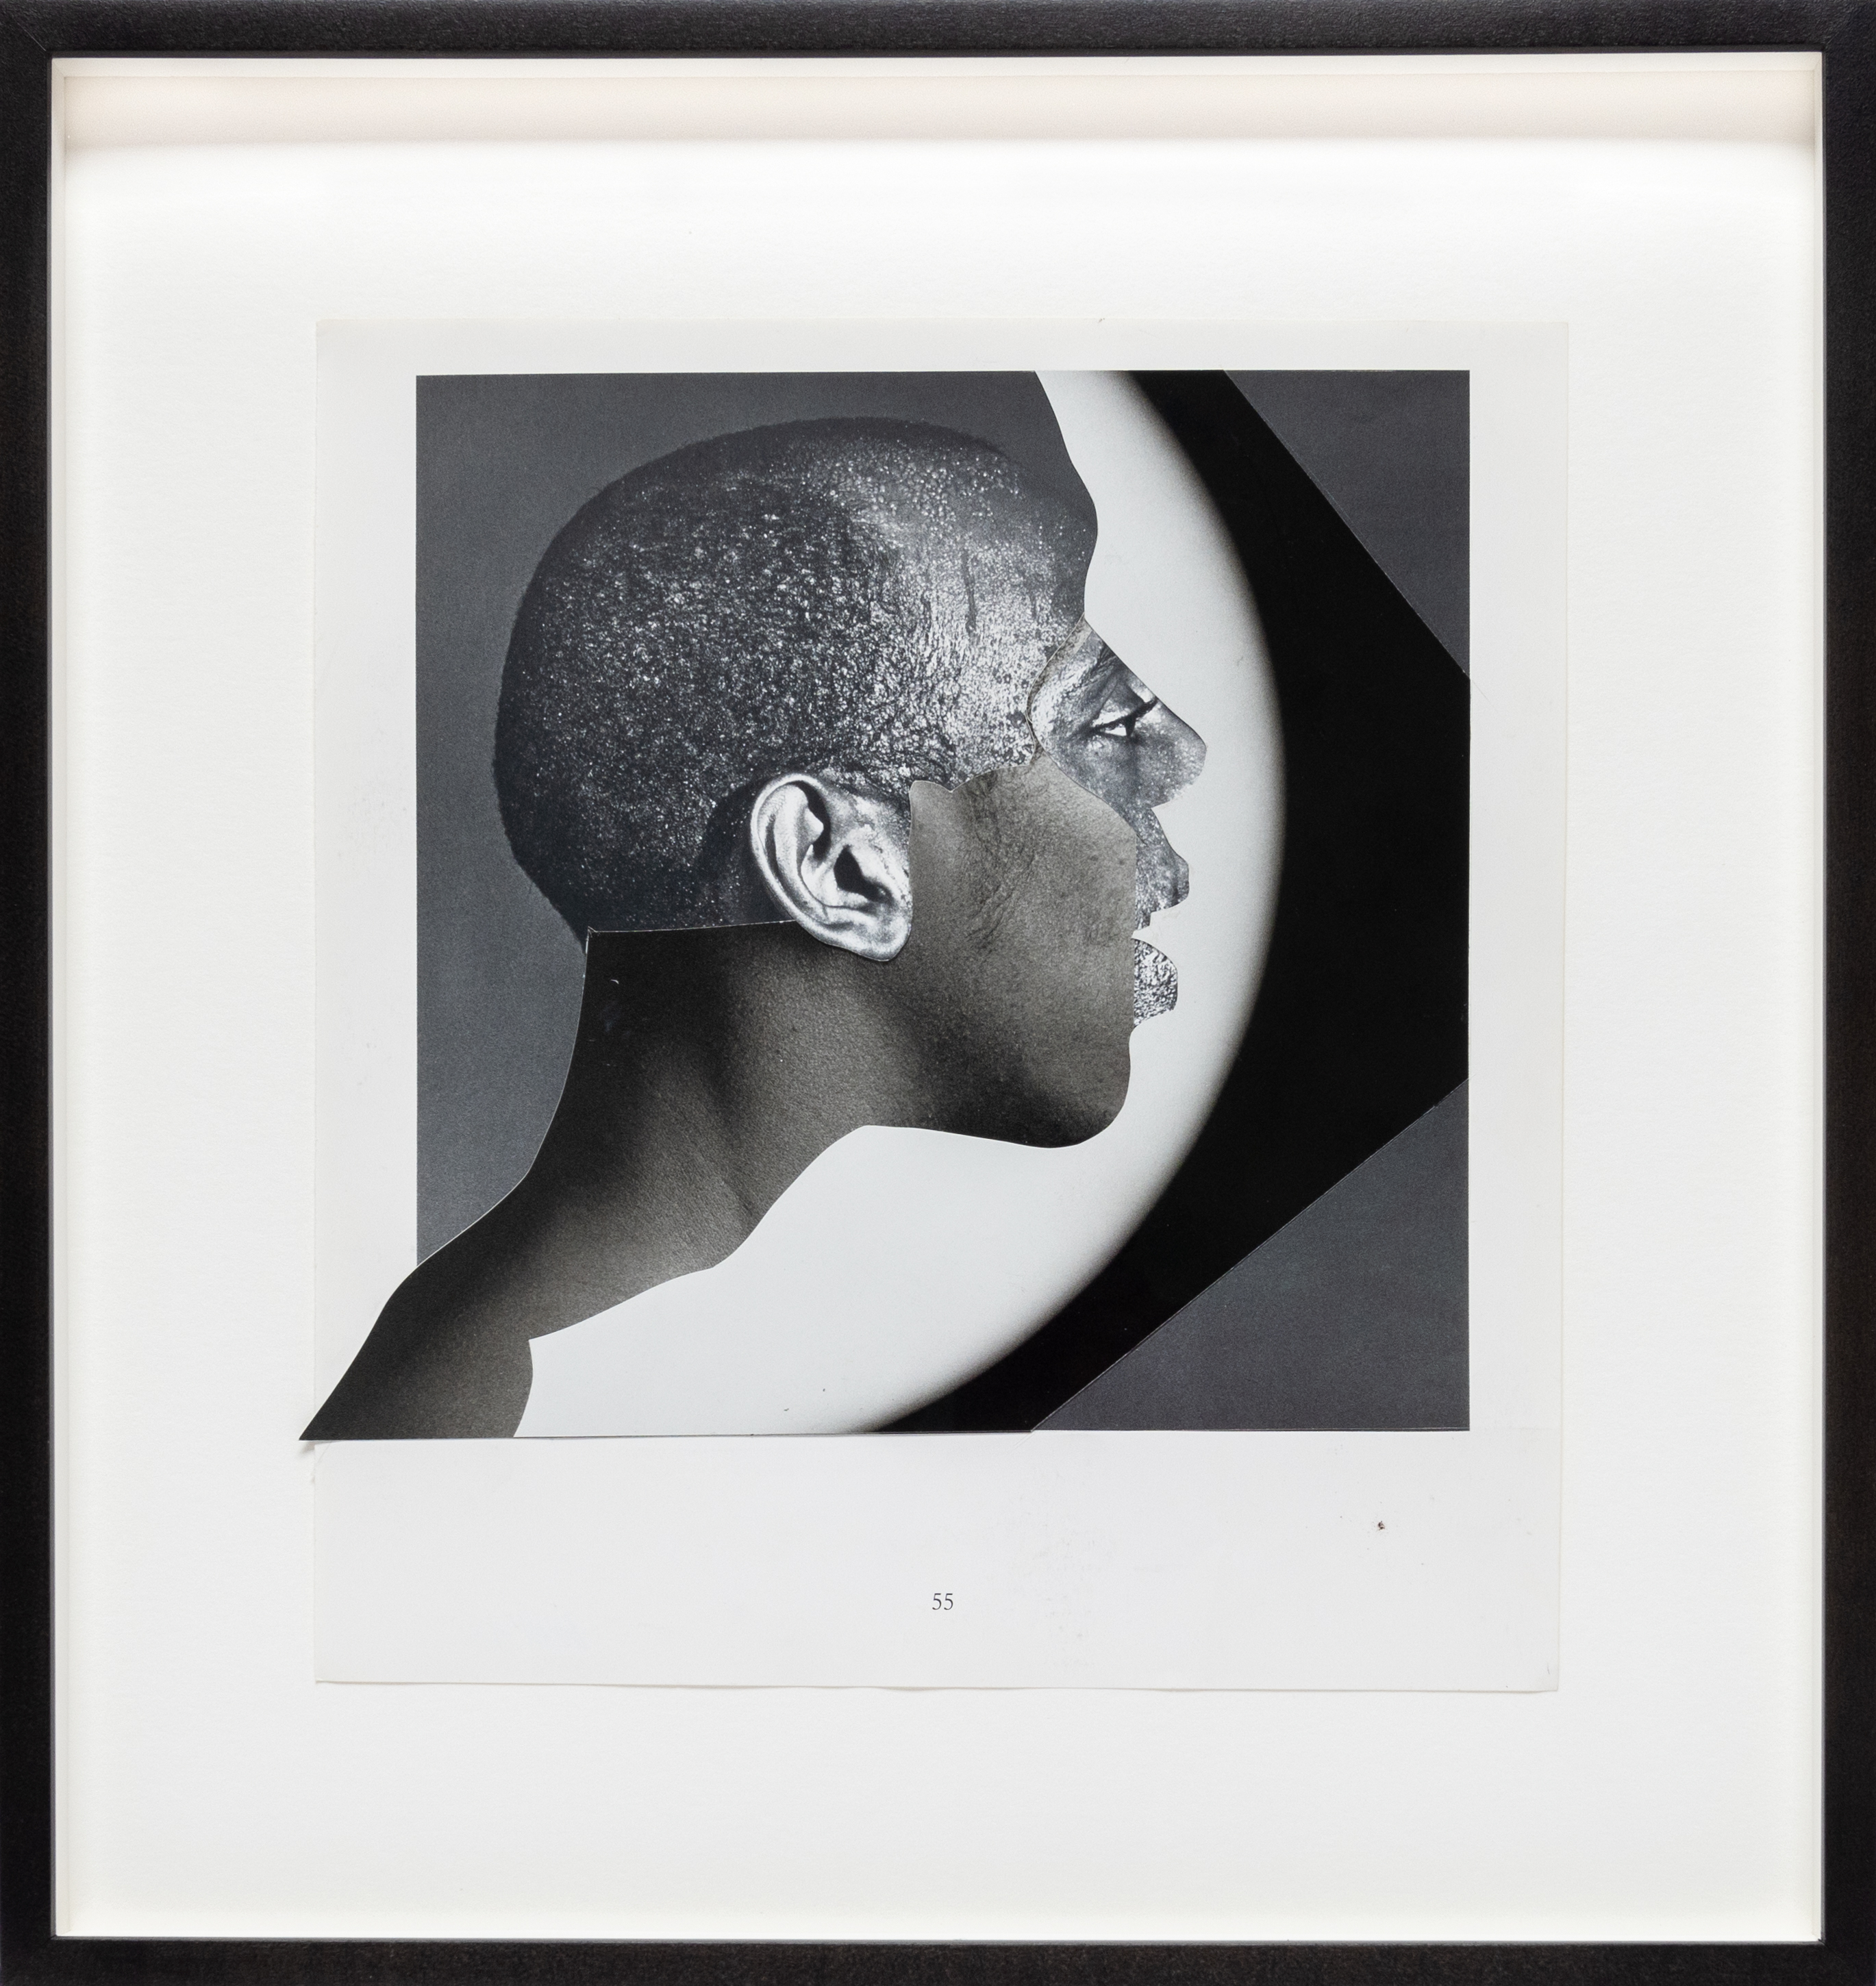 Color image of a black and white collage of a silhouetted figure with abstracted features framed in black